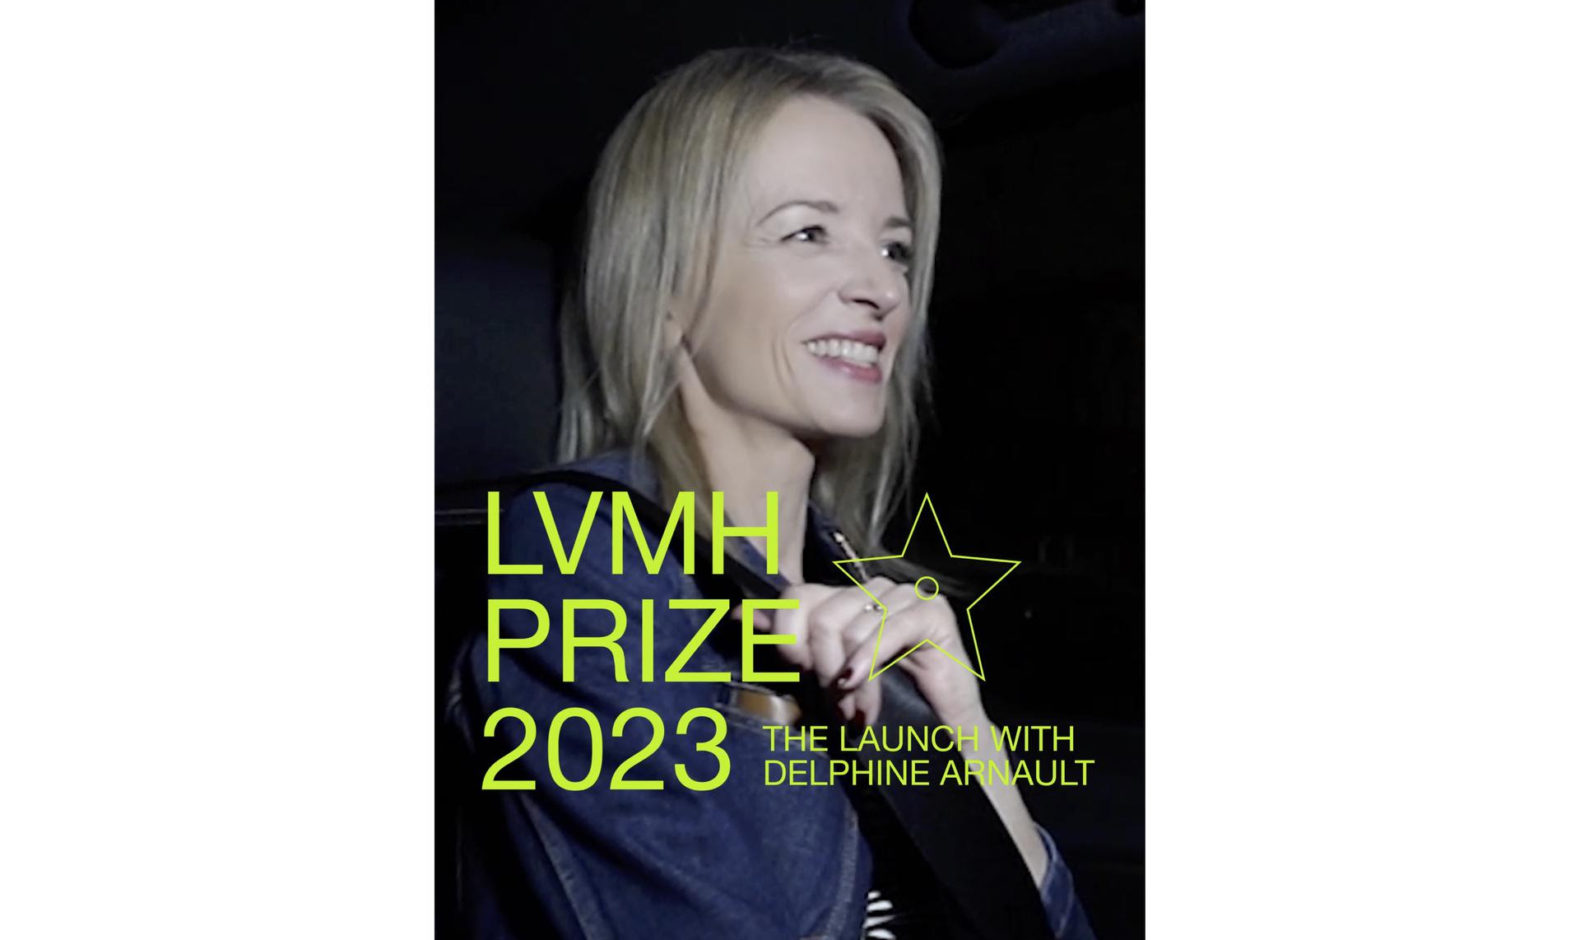 2020 LVMH Prize: Sustainability is at the forefront, says Delphine